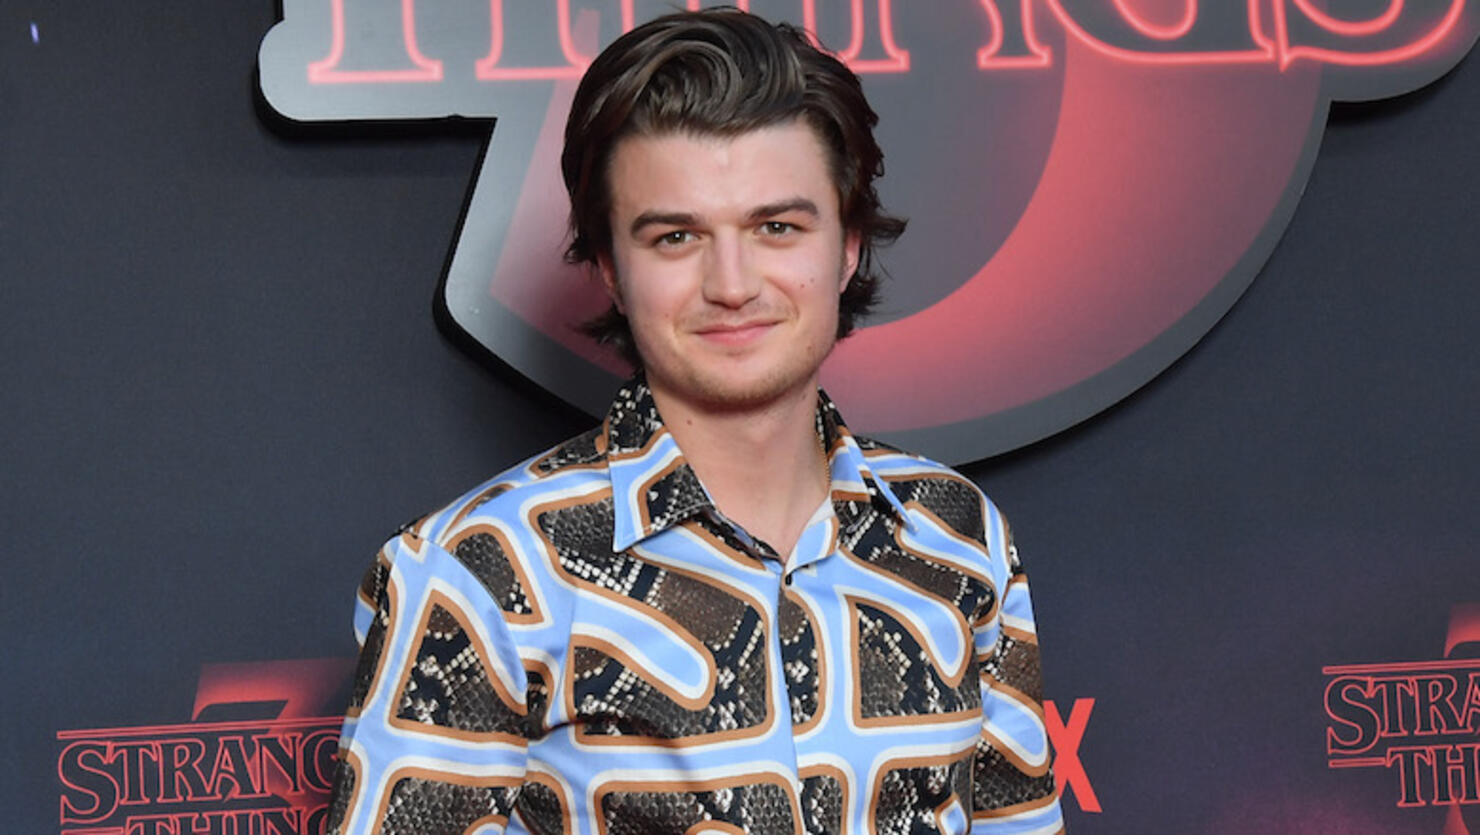 Premiere Of Netflix's "Stranger Things 3" : Photocall At Le Grand Rex In Paris